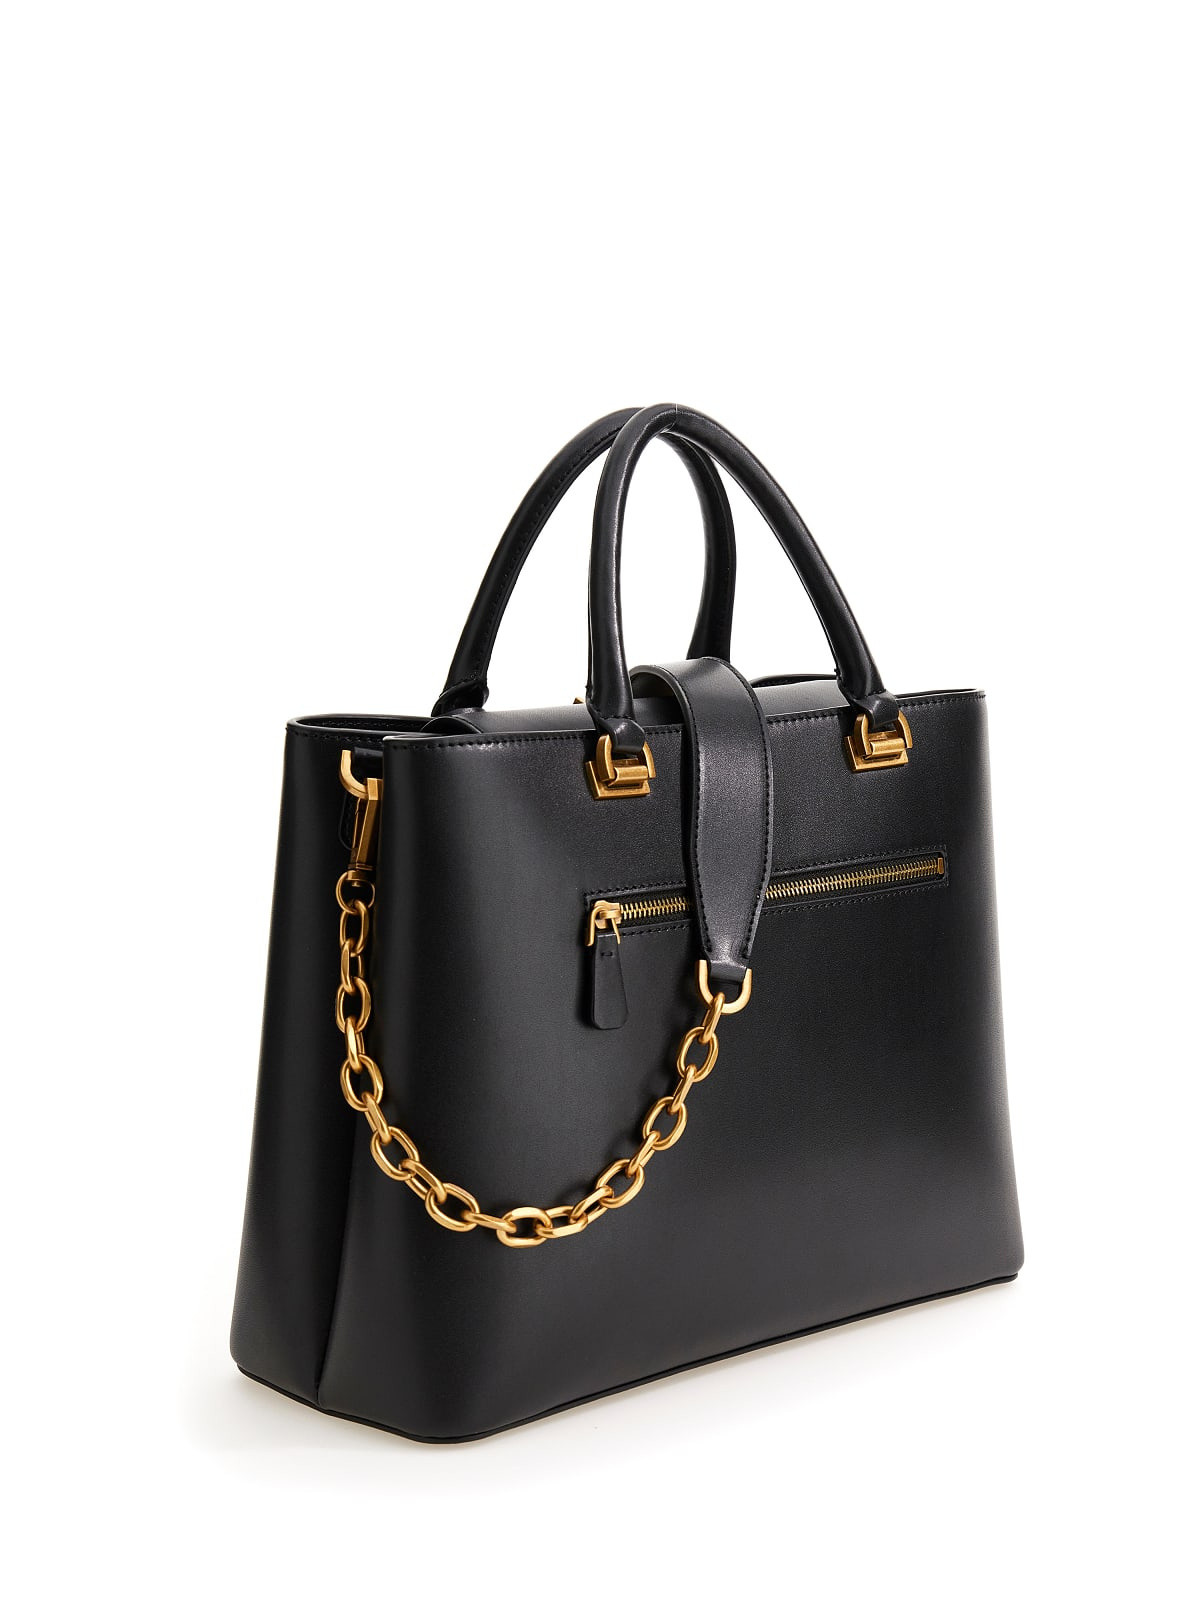 Hand bag with chain strap, Black, large image number 1